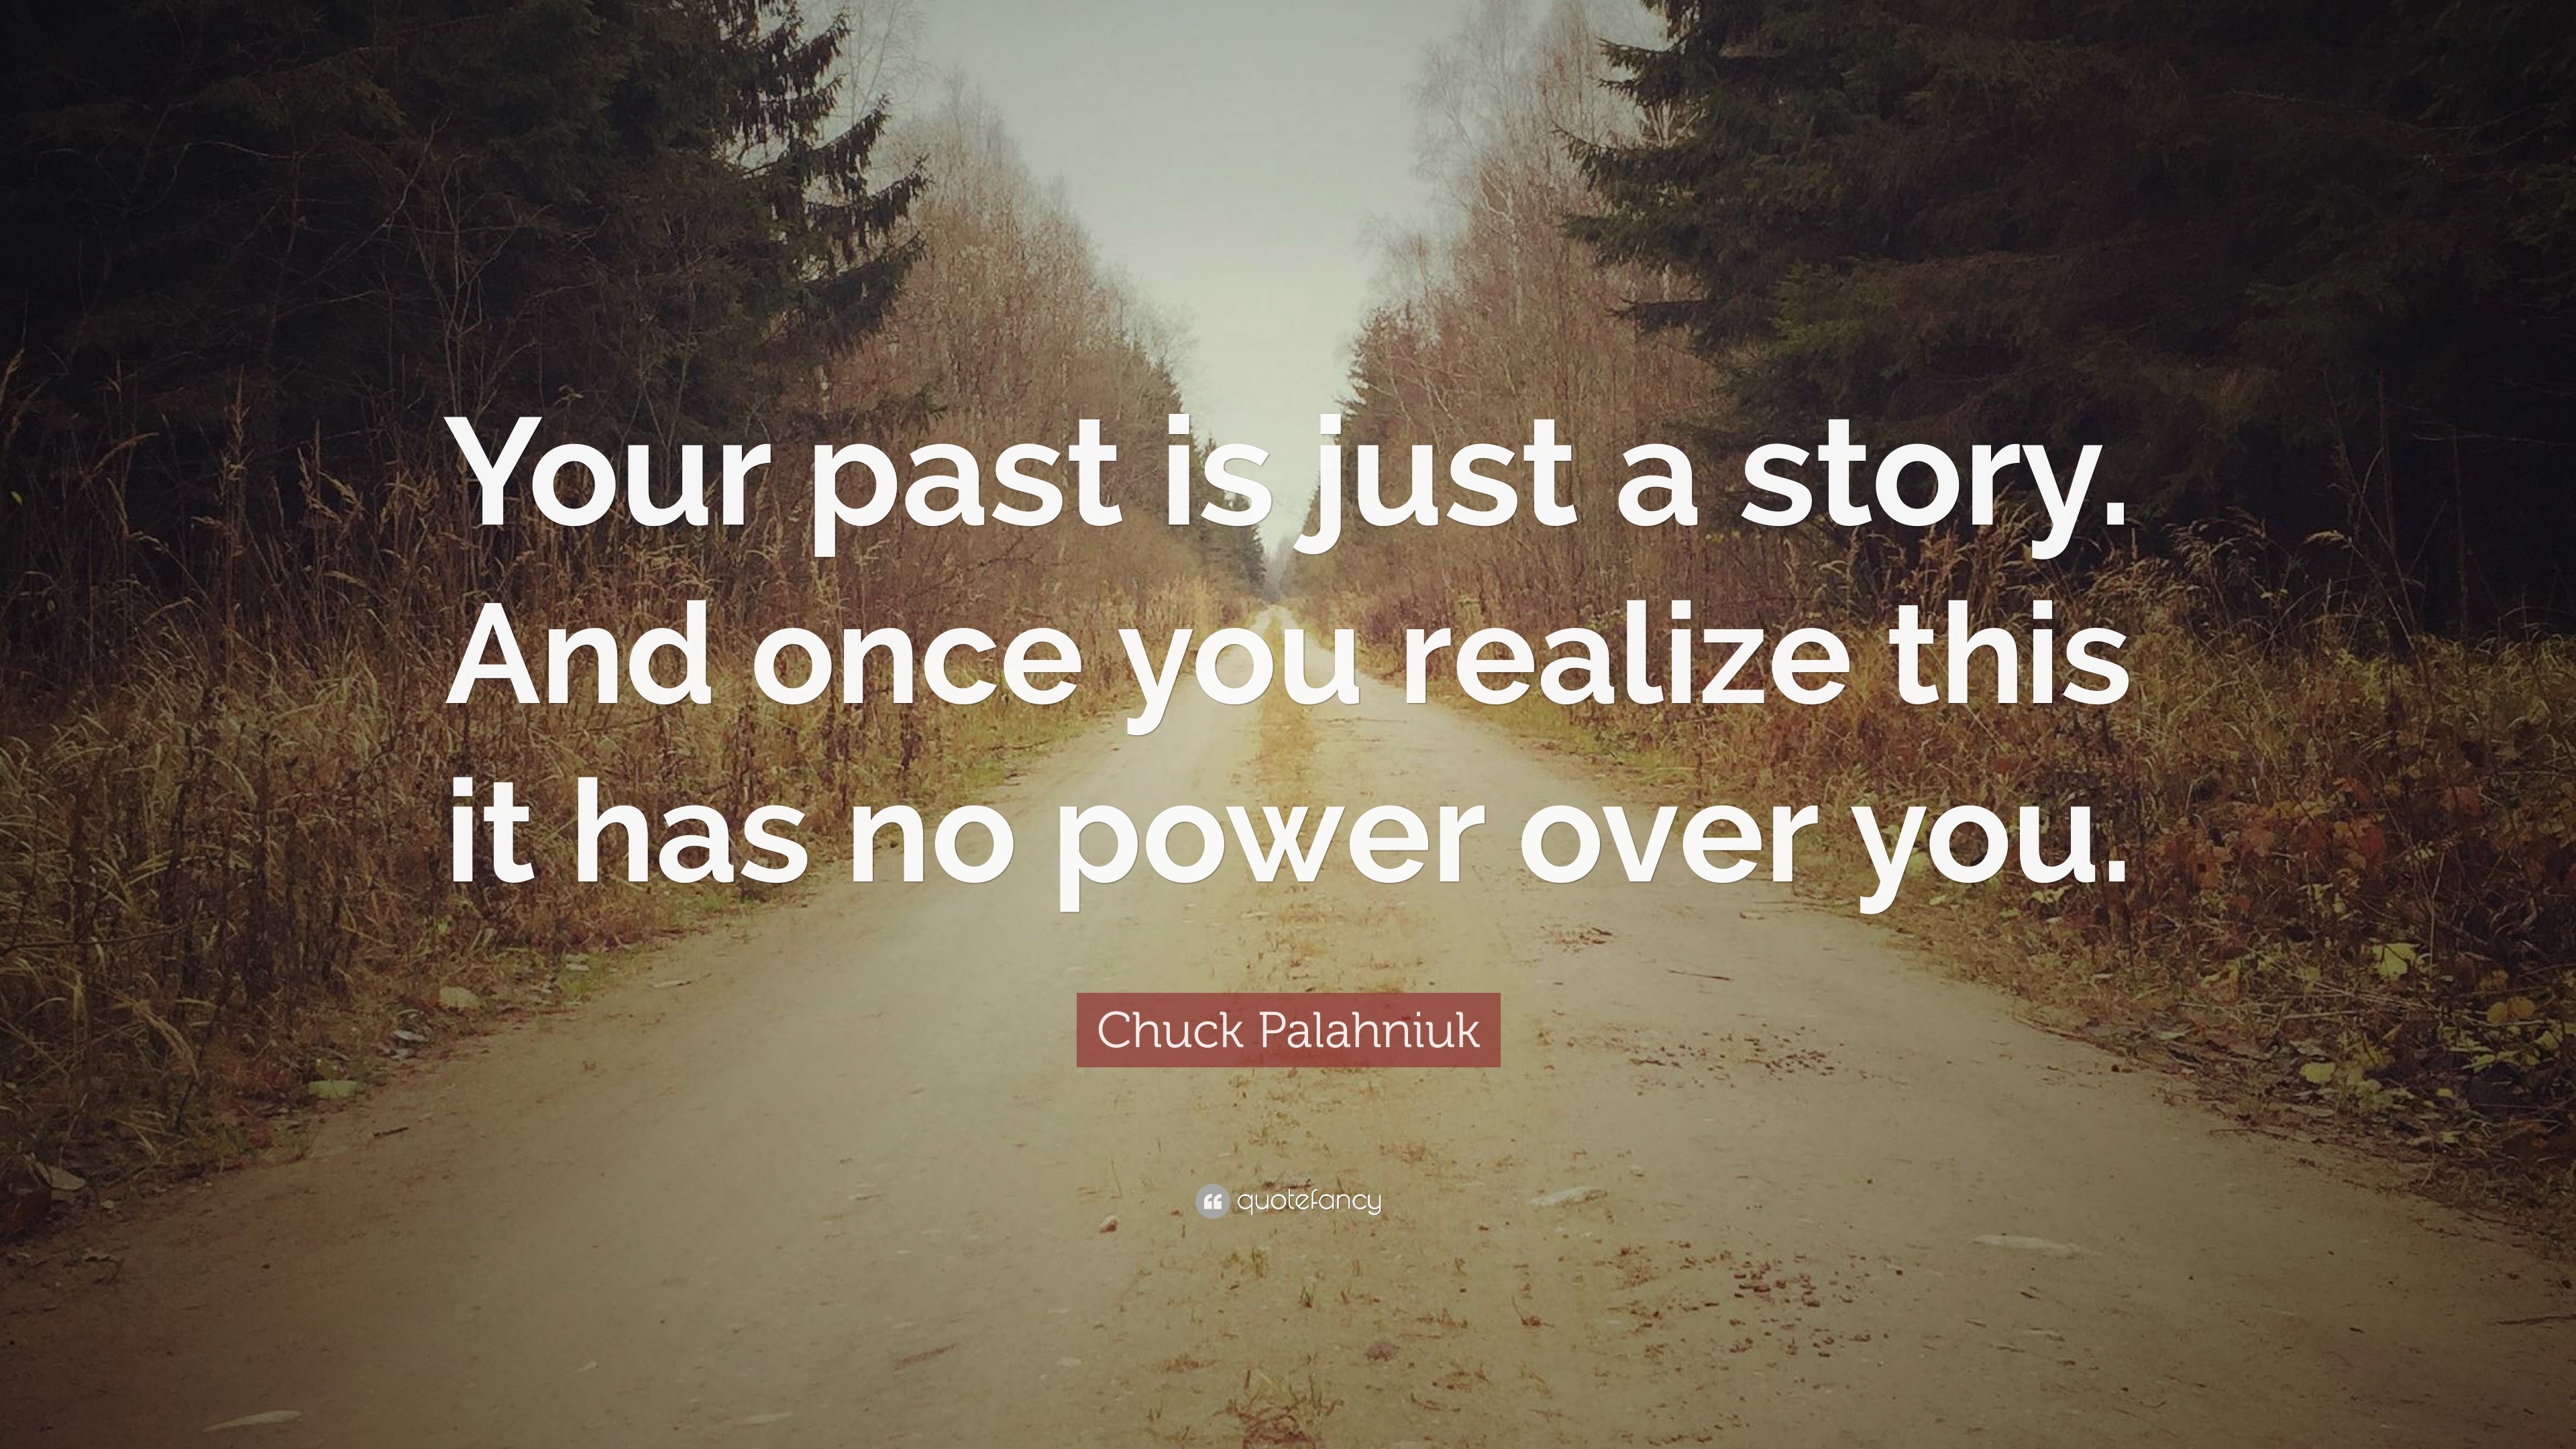 200+ Learn From The Past Quotes To Inspire You